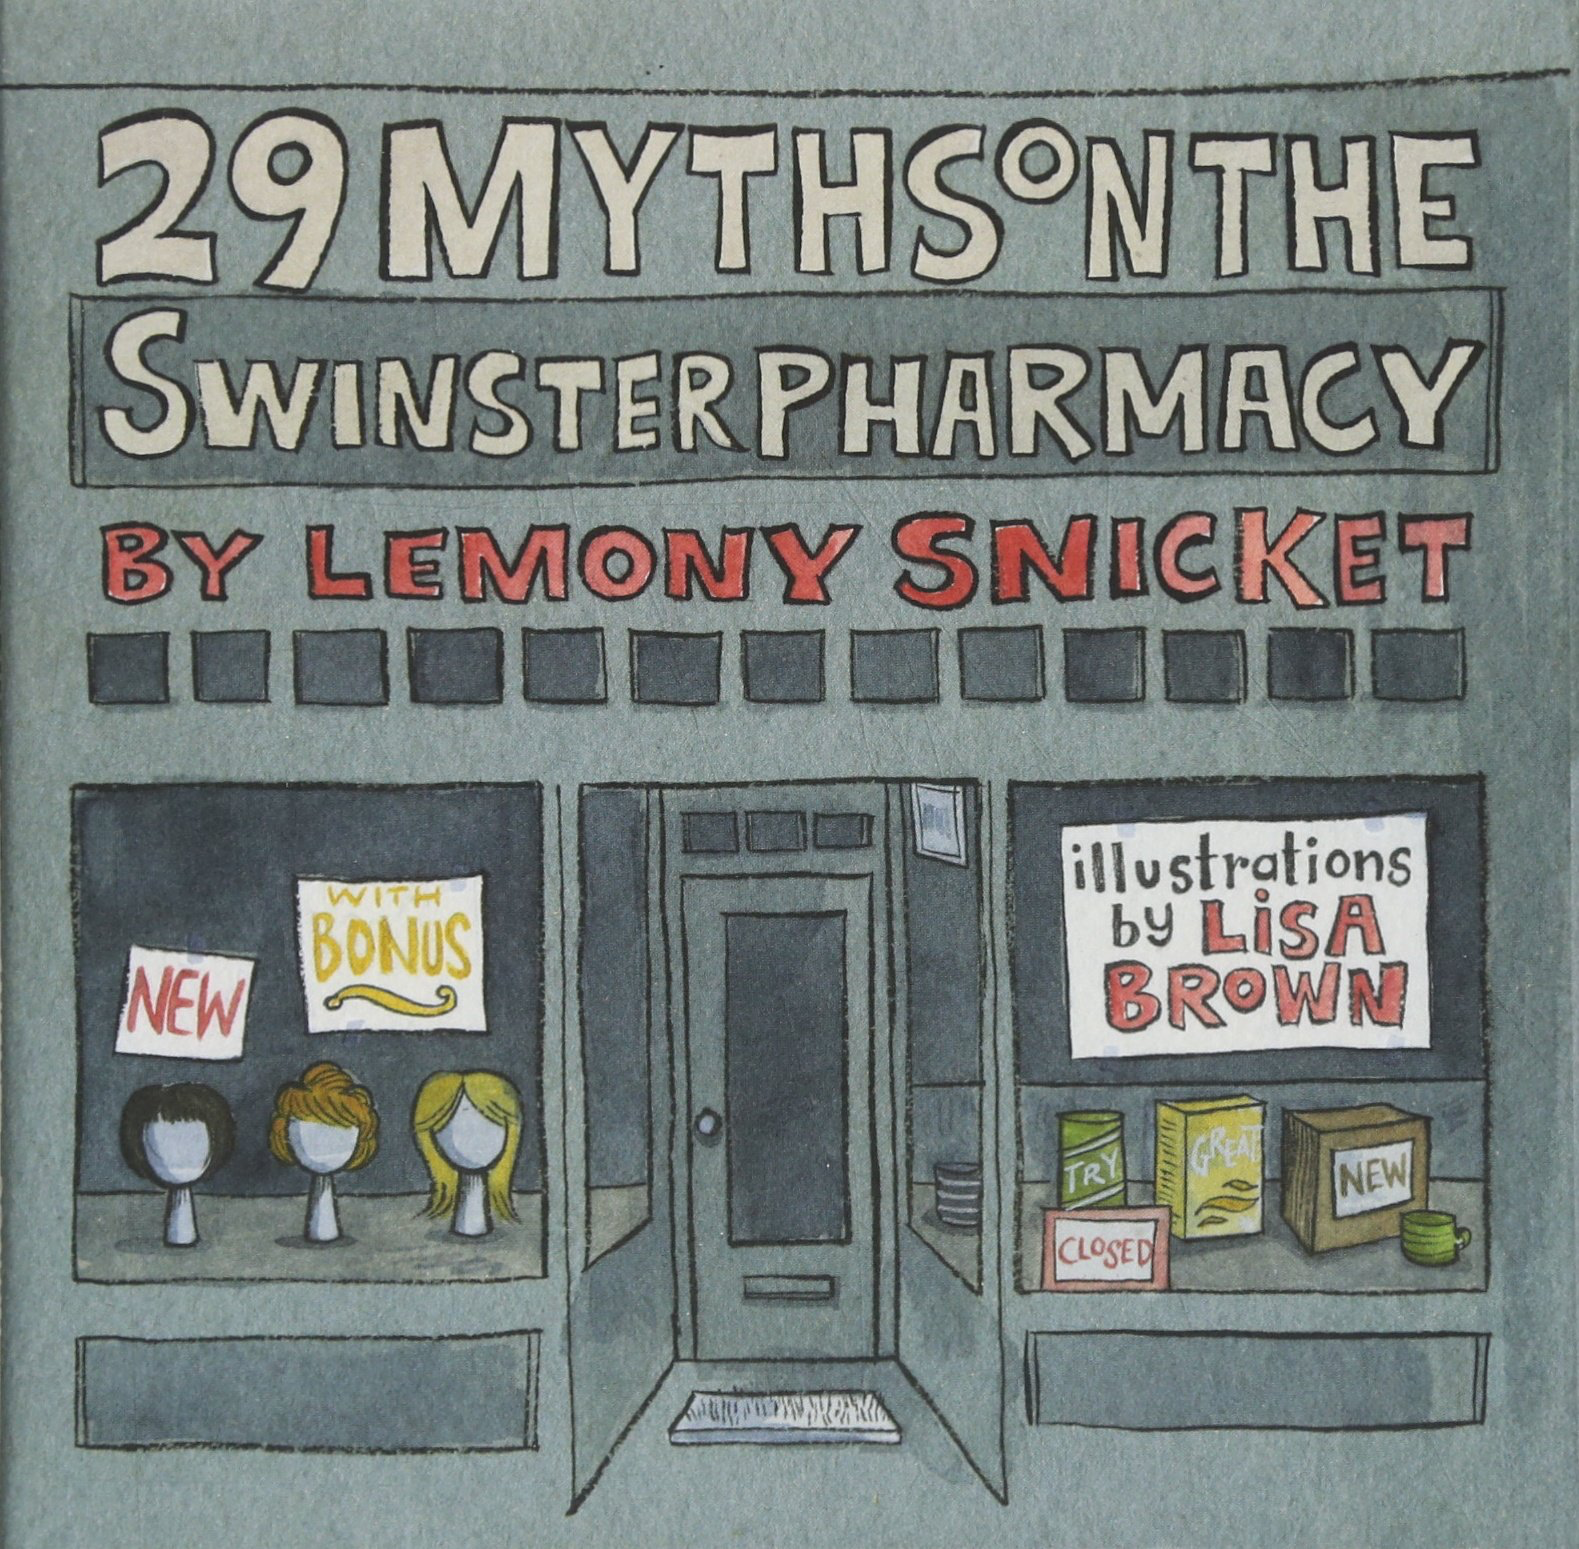 Greenish-gray colored cover storefront. Title in gray large font across the top middle, with the author name in red font, spanning 3 rows. "Illustrations by Lisa Brown" text on a poster on the right window.